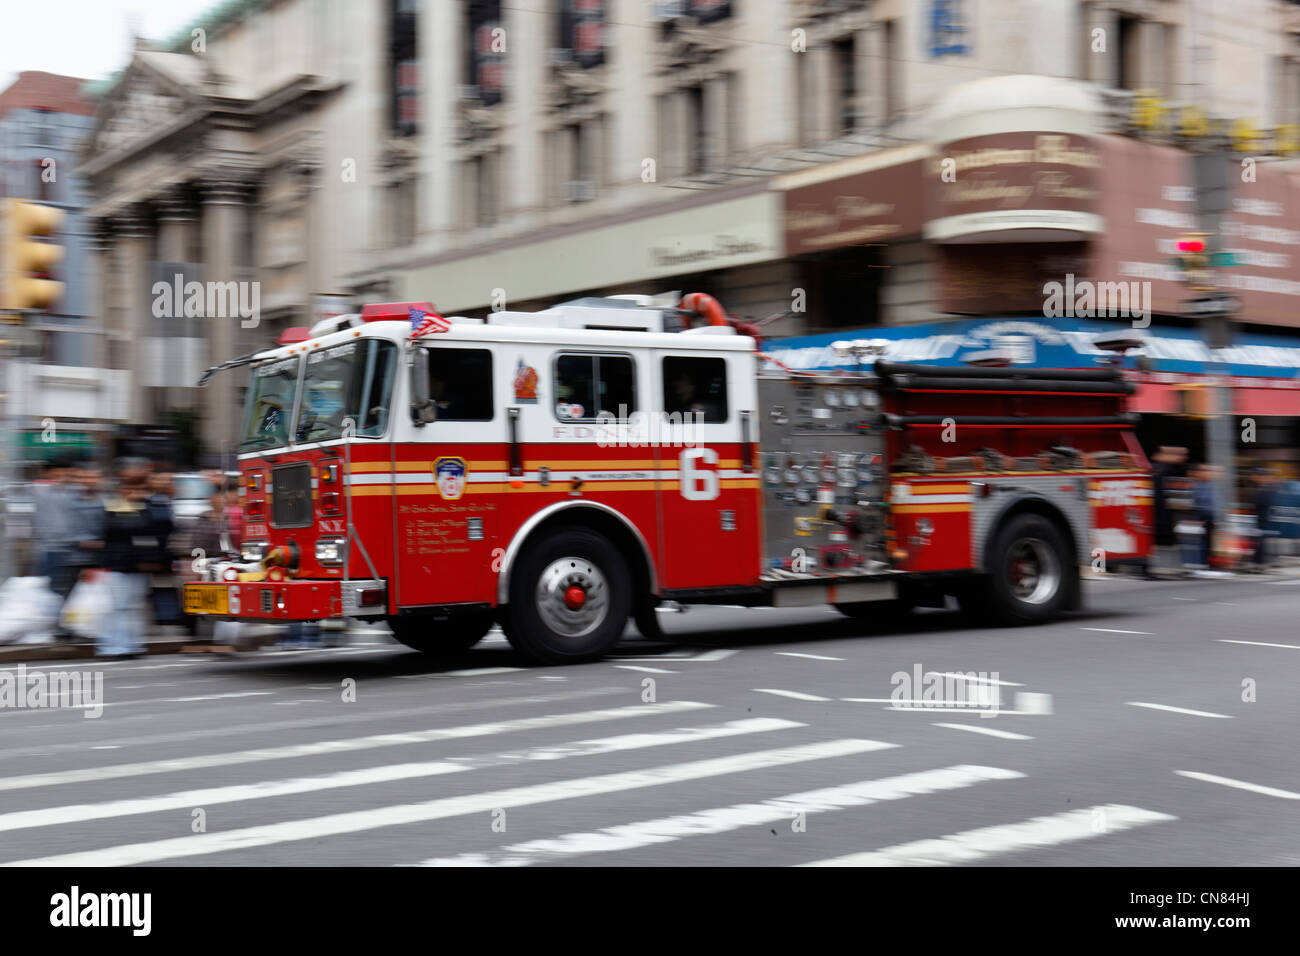 United States, New York City, Manhattan, fire truck in action Stock Photo